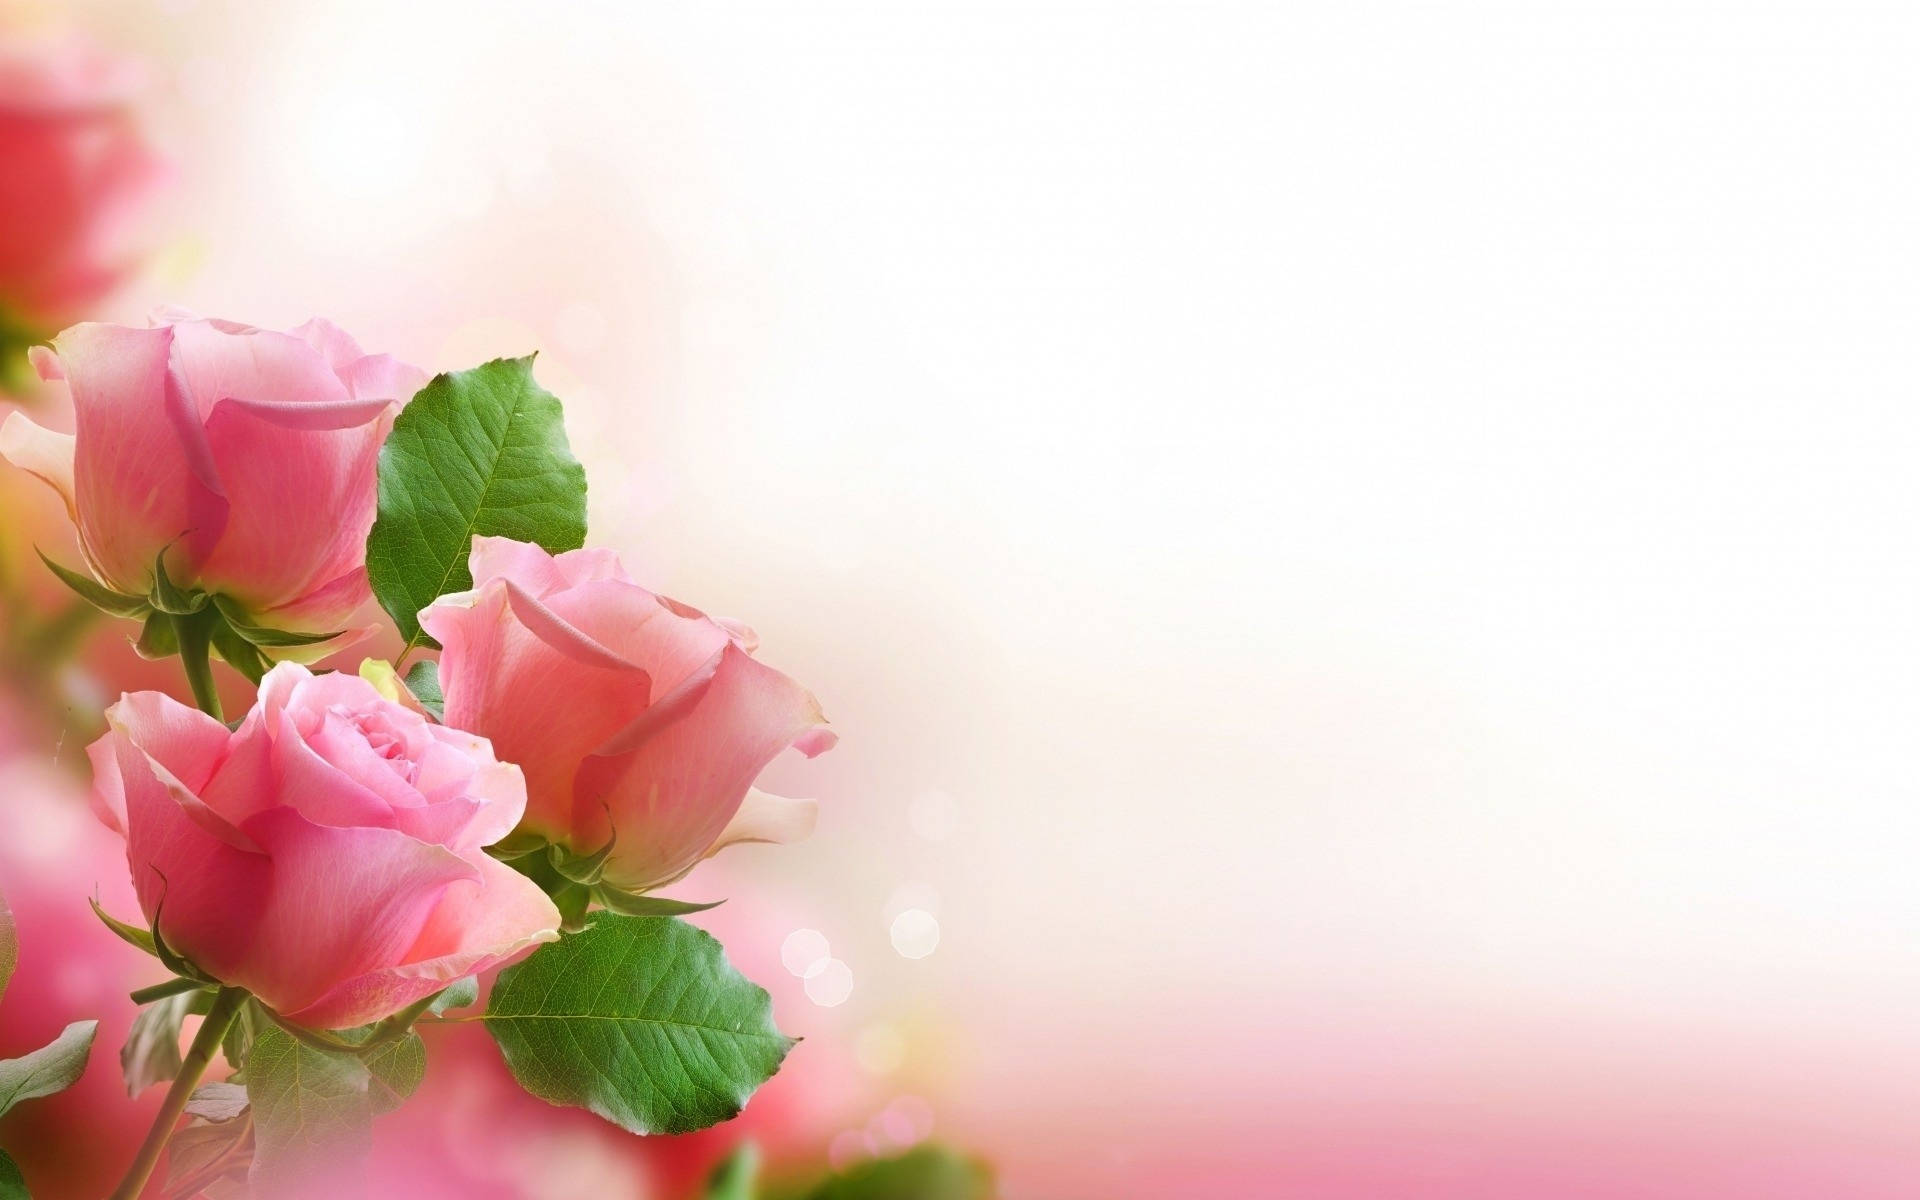 Romantic Love Flowers Pink Roses Background